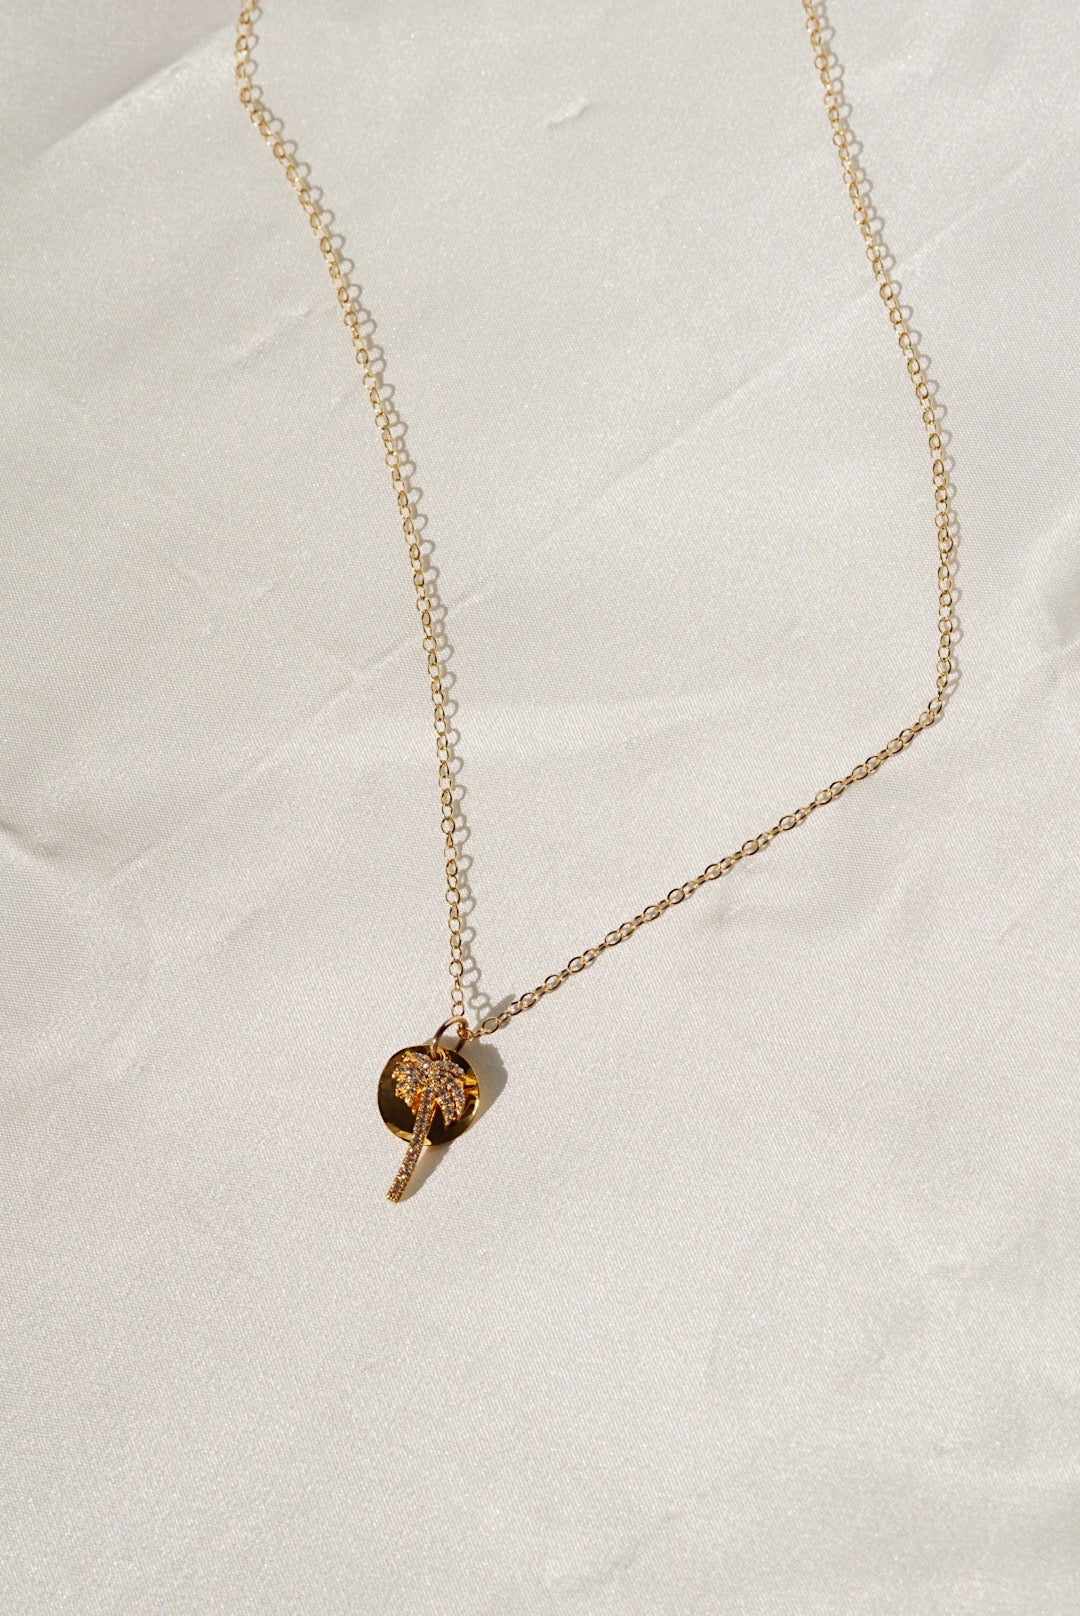 ISLA Palm Tree Charm Gold Filled Necklace